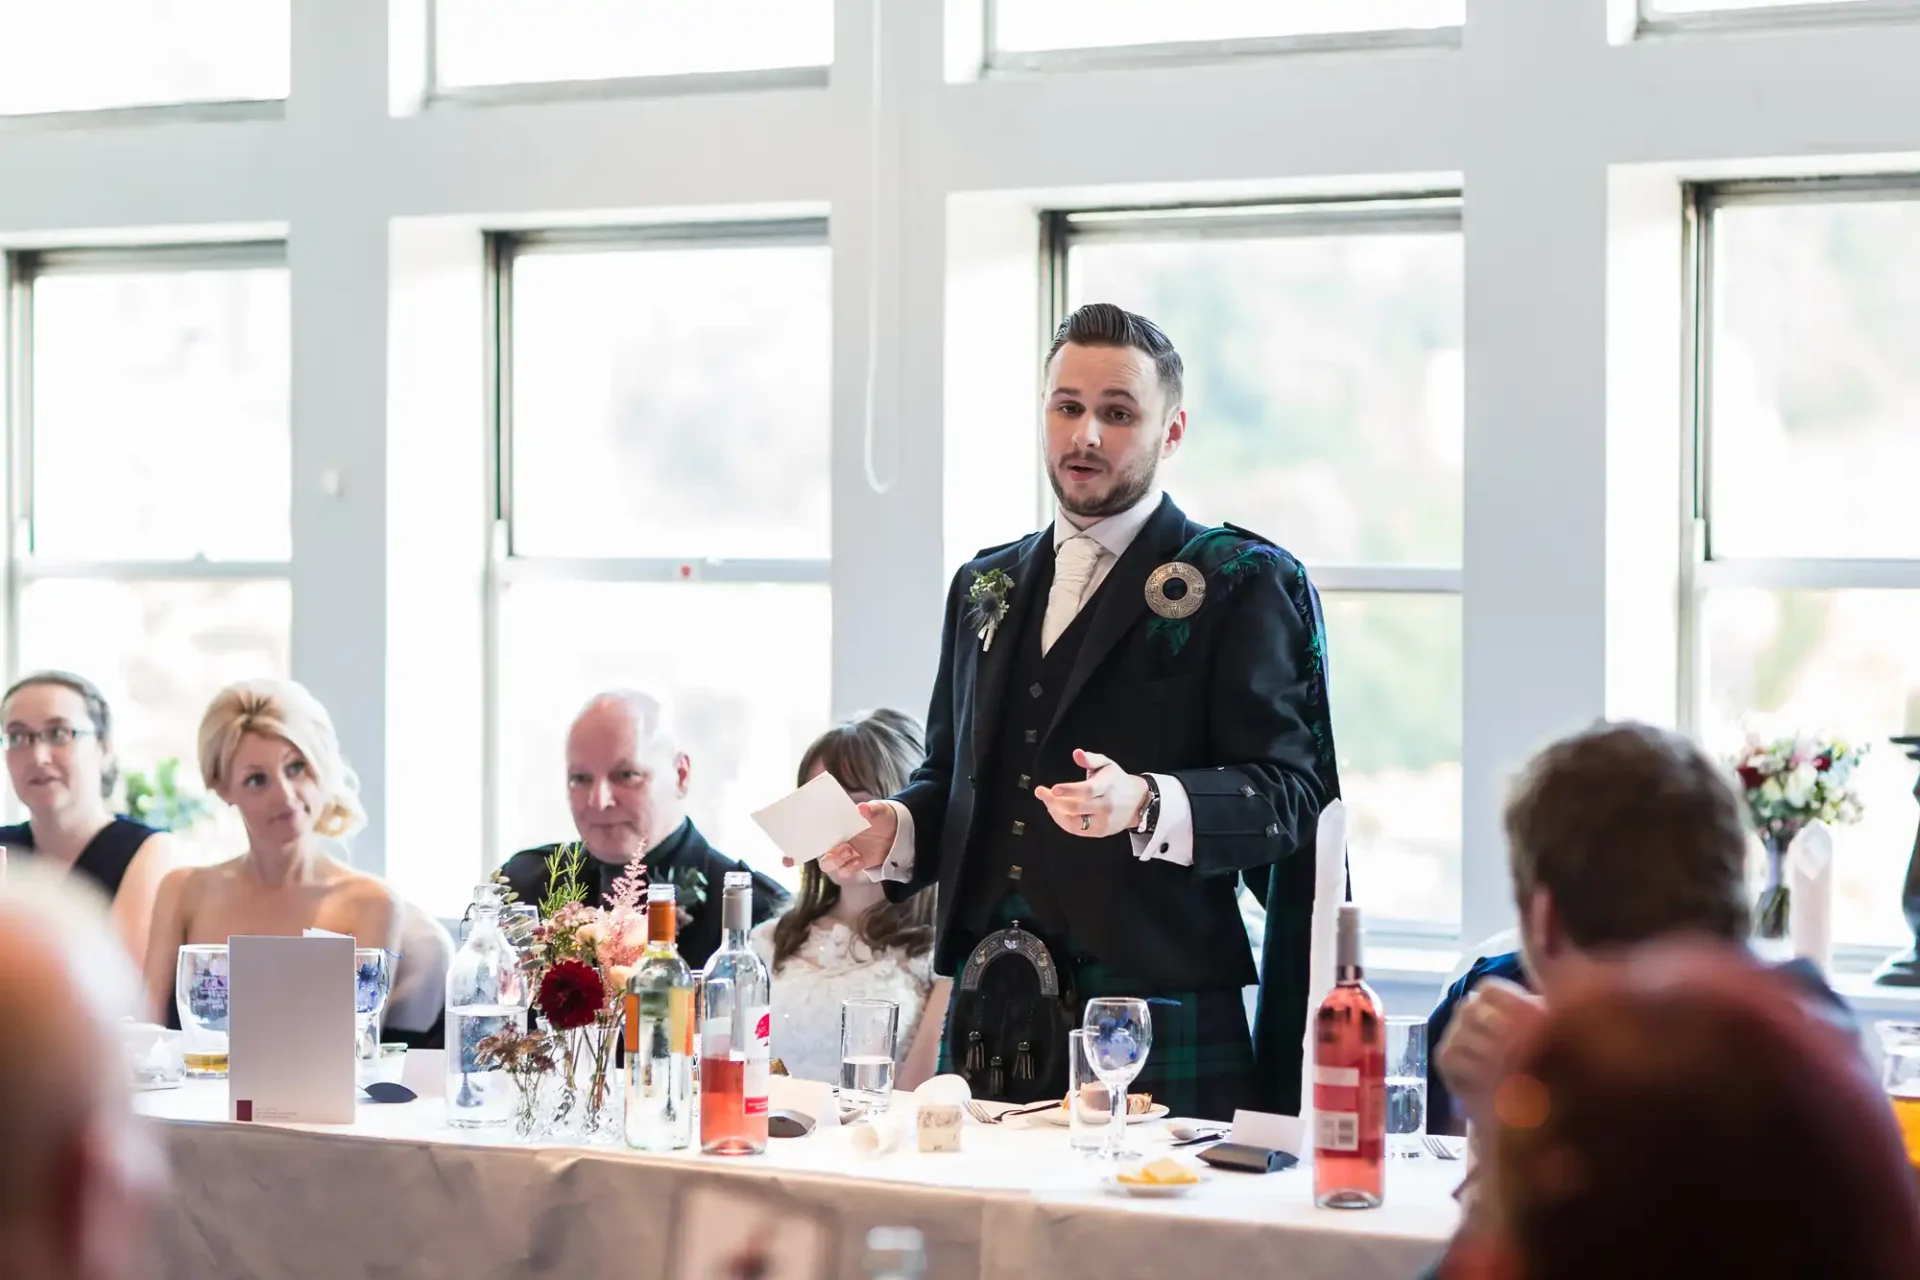 A man in a suit giving a speech at a wedding reception, holding a microphone in one hand and notes in the other, with guests listening around tables.